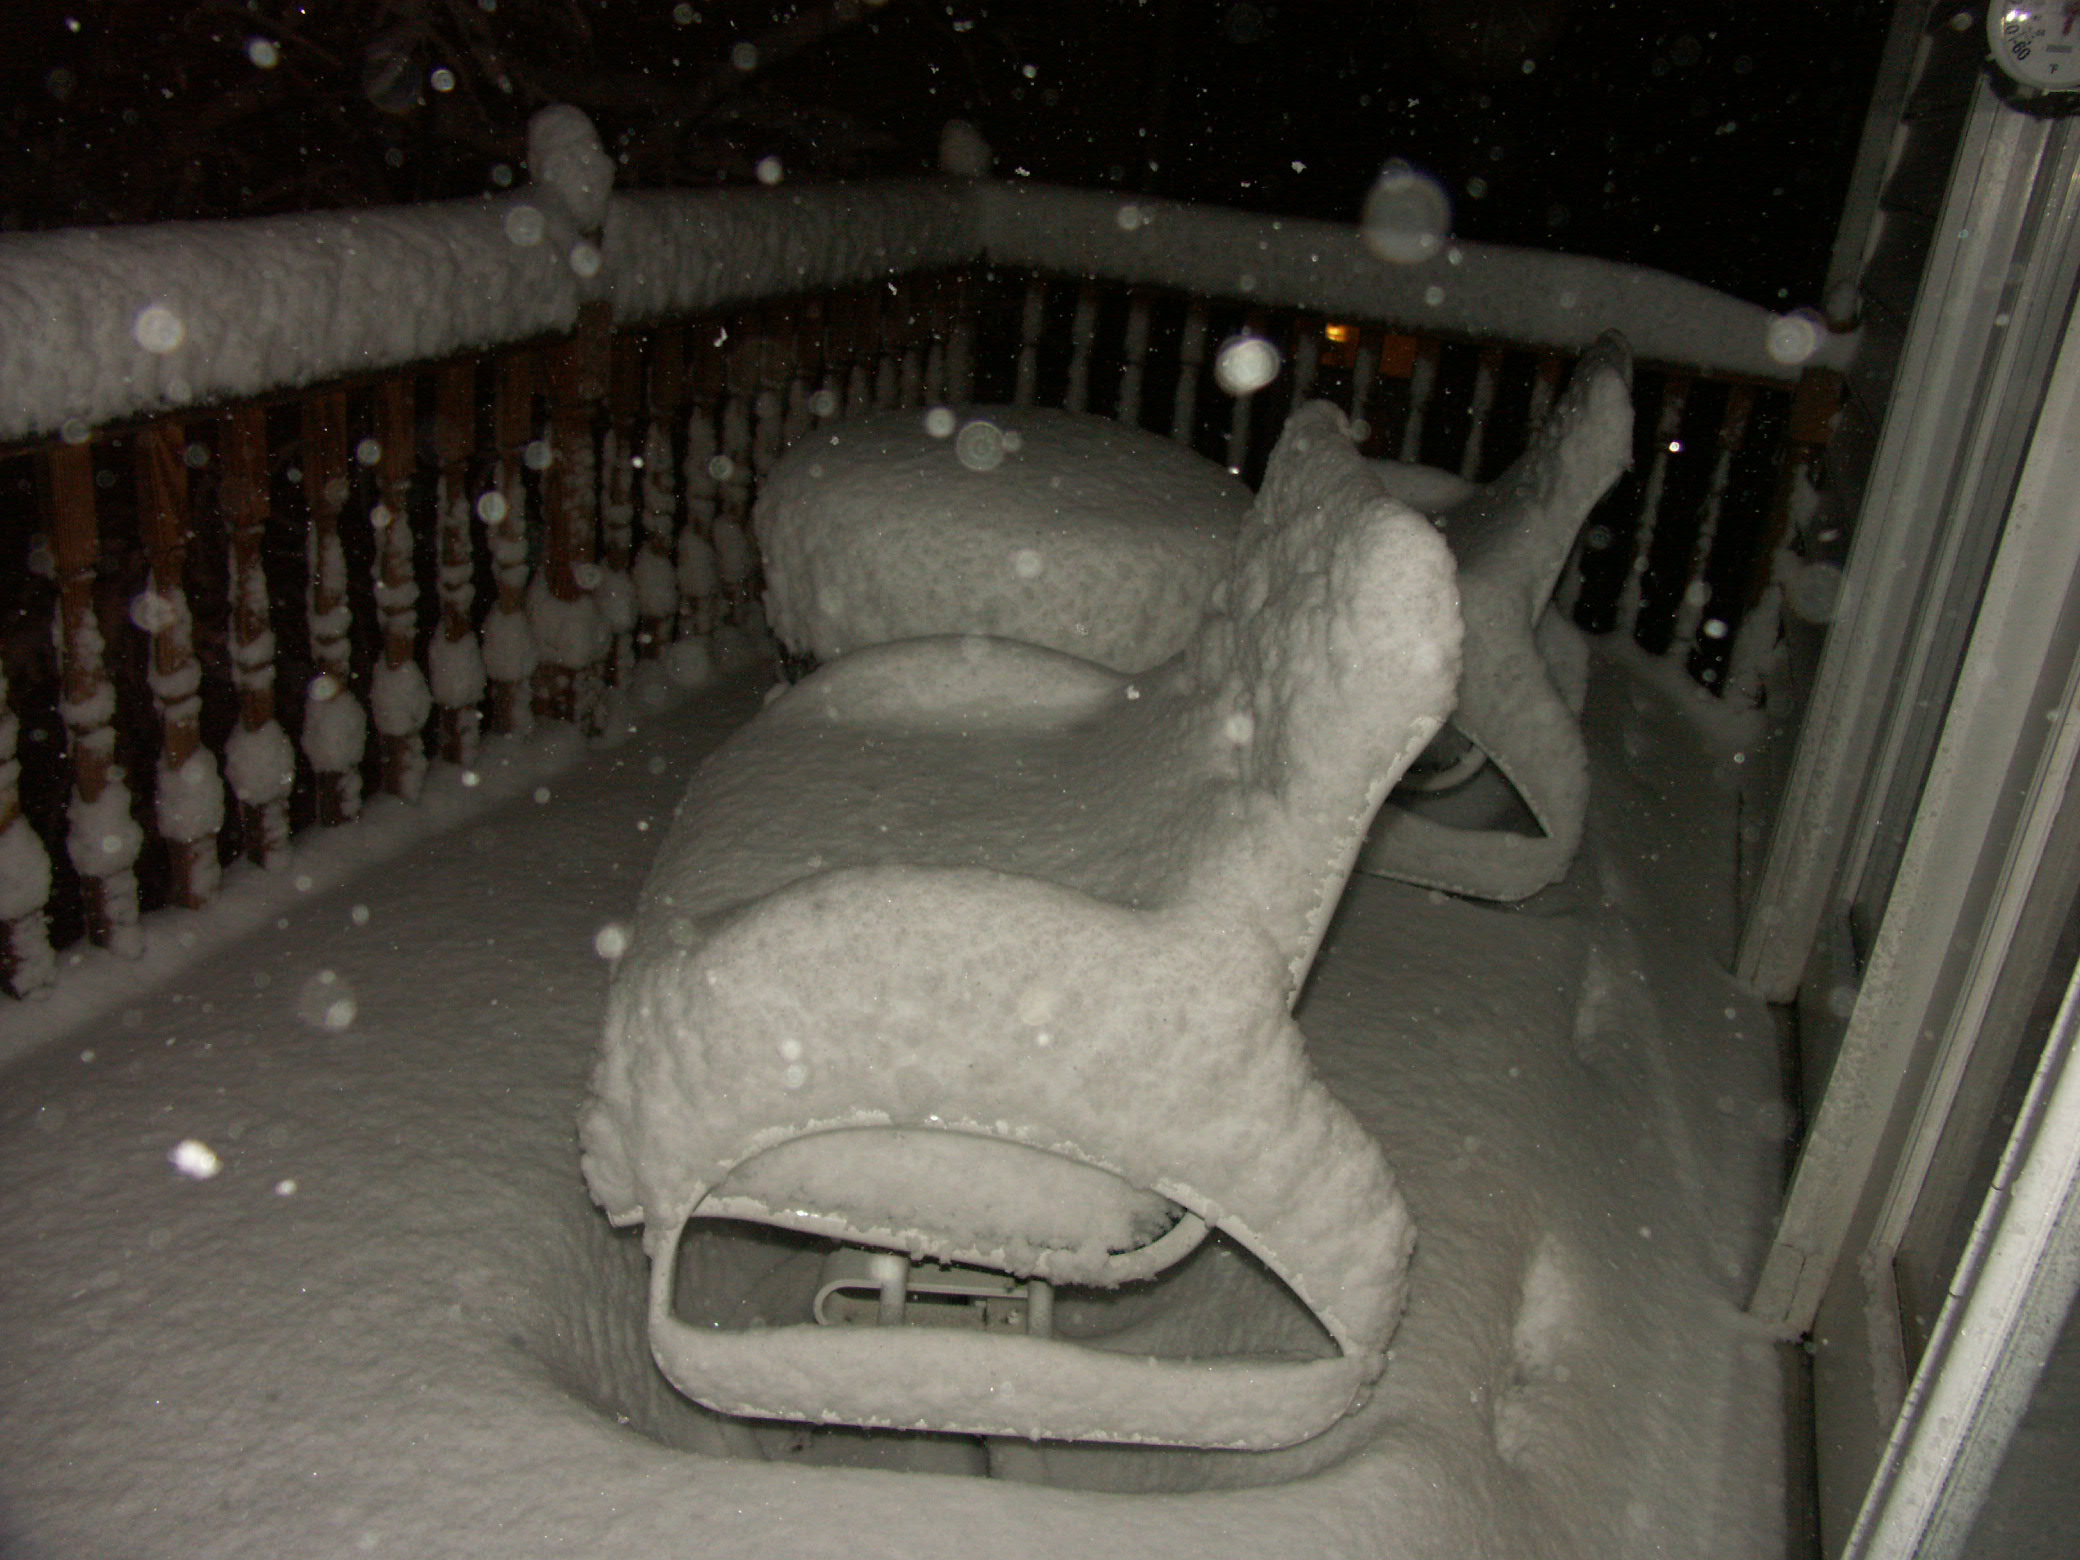 upstairs deck-just starting but 6 inches already